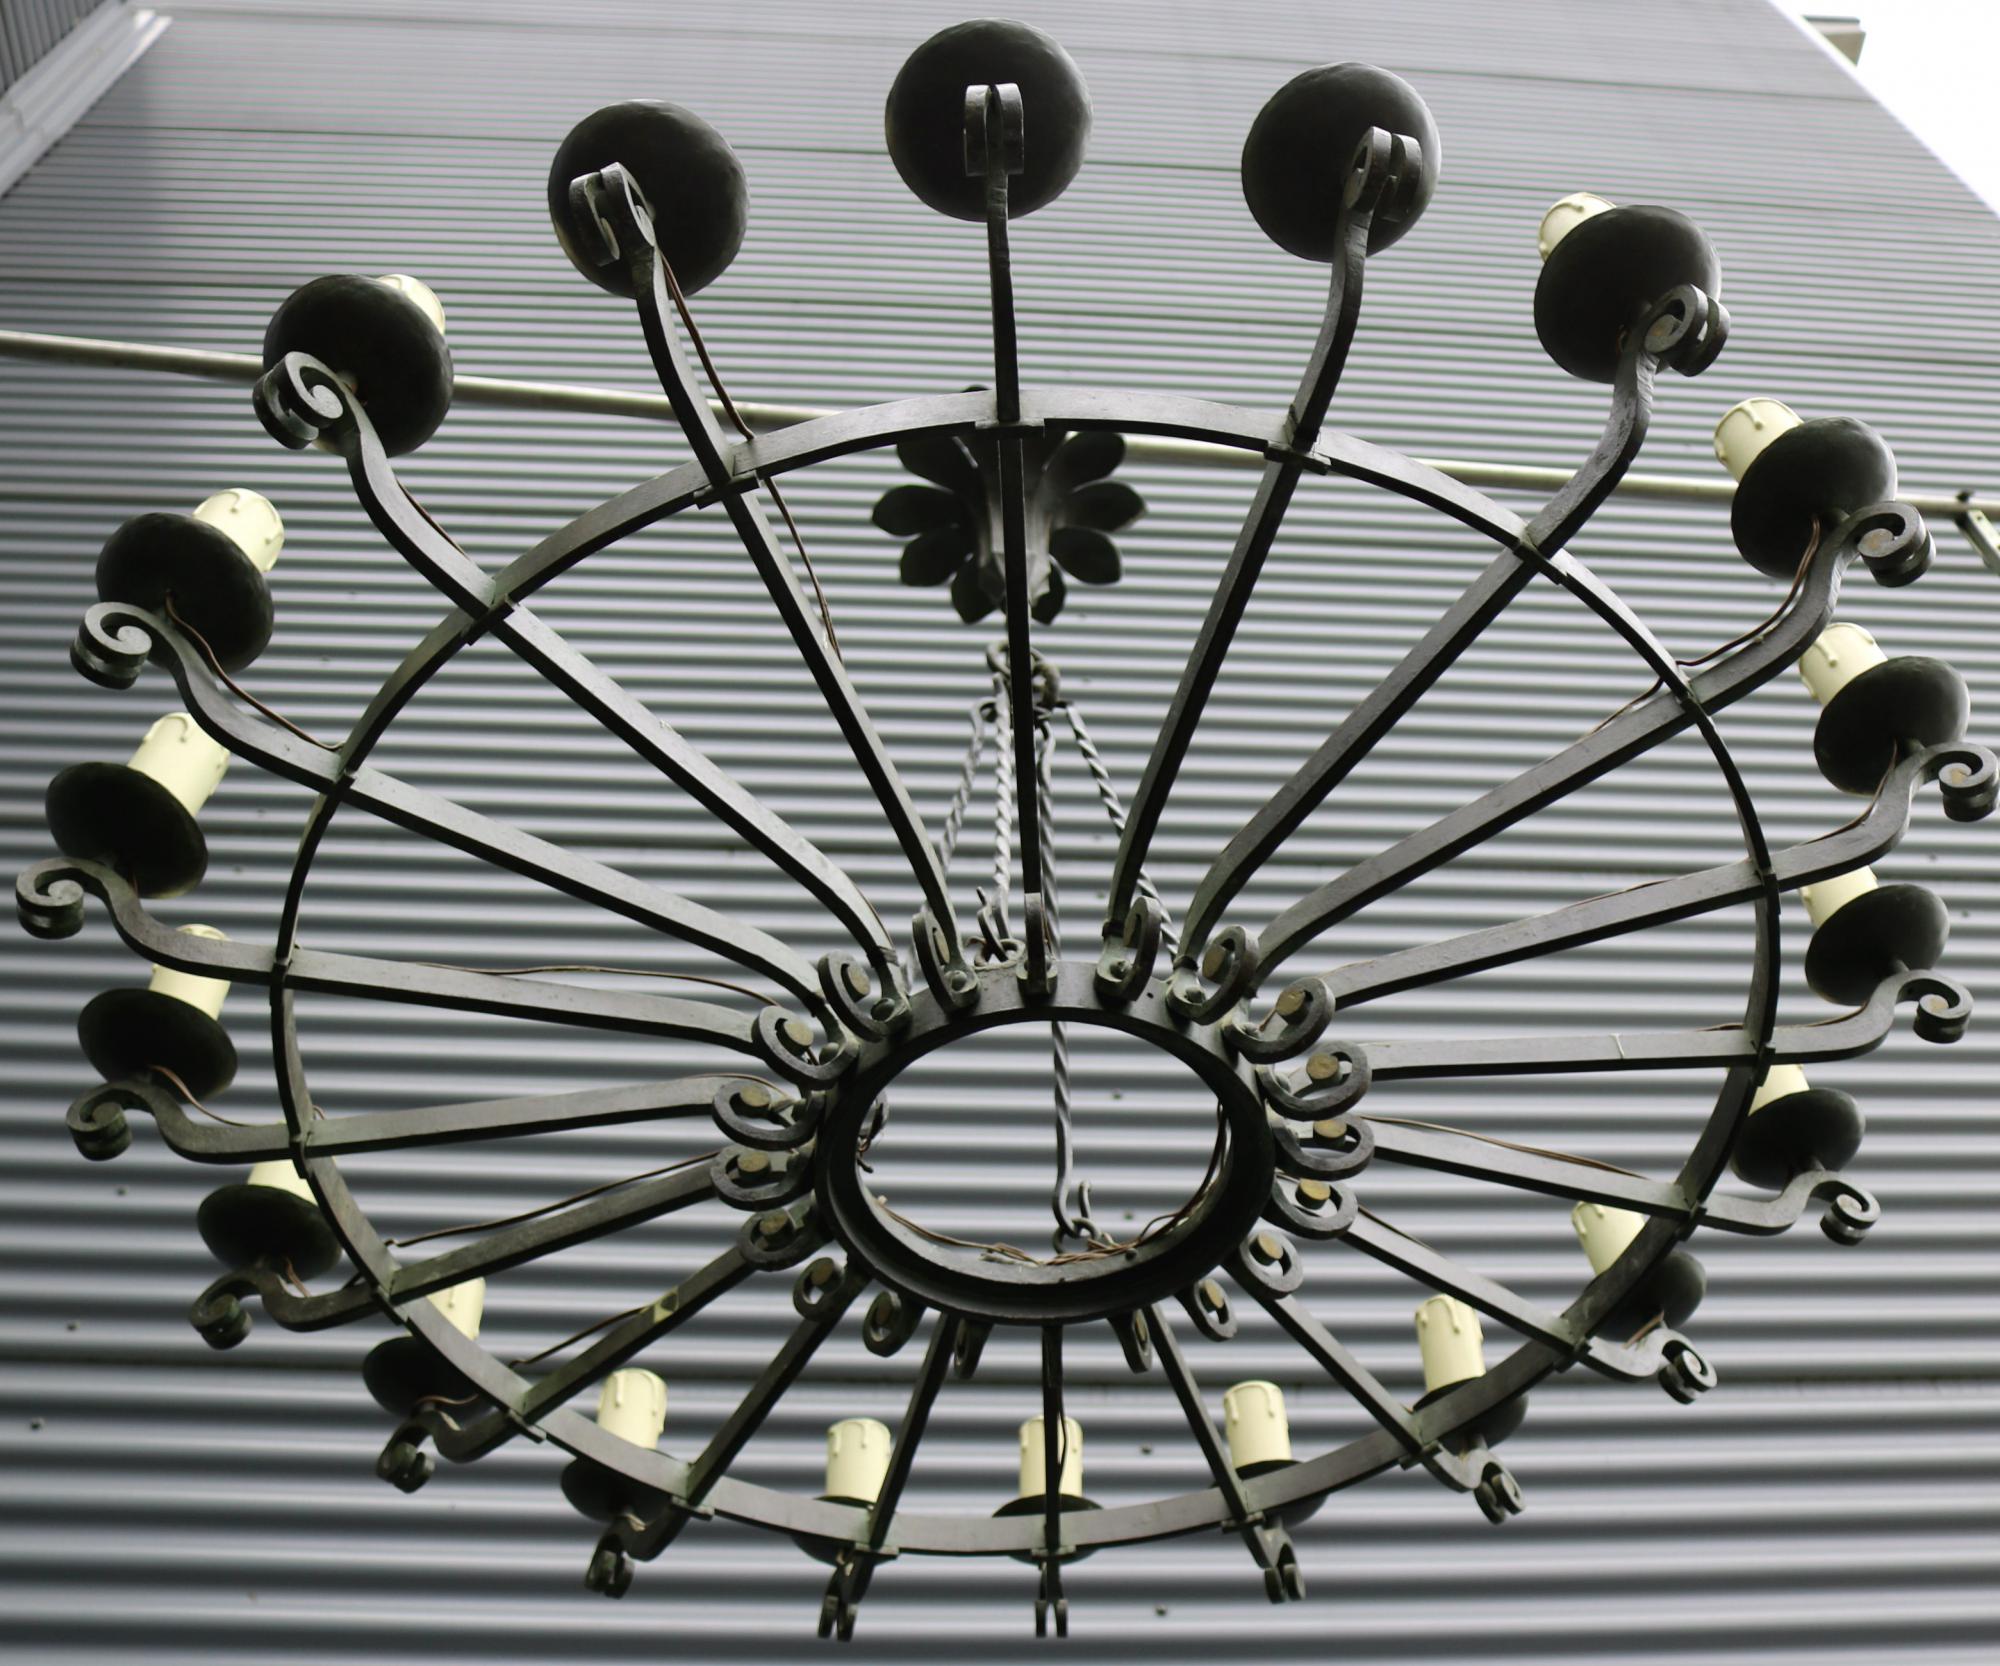 Large 20 light forged iron a-deco chandelier .